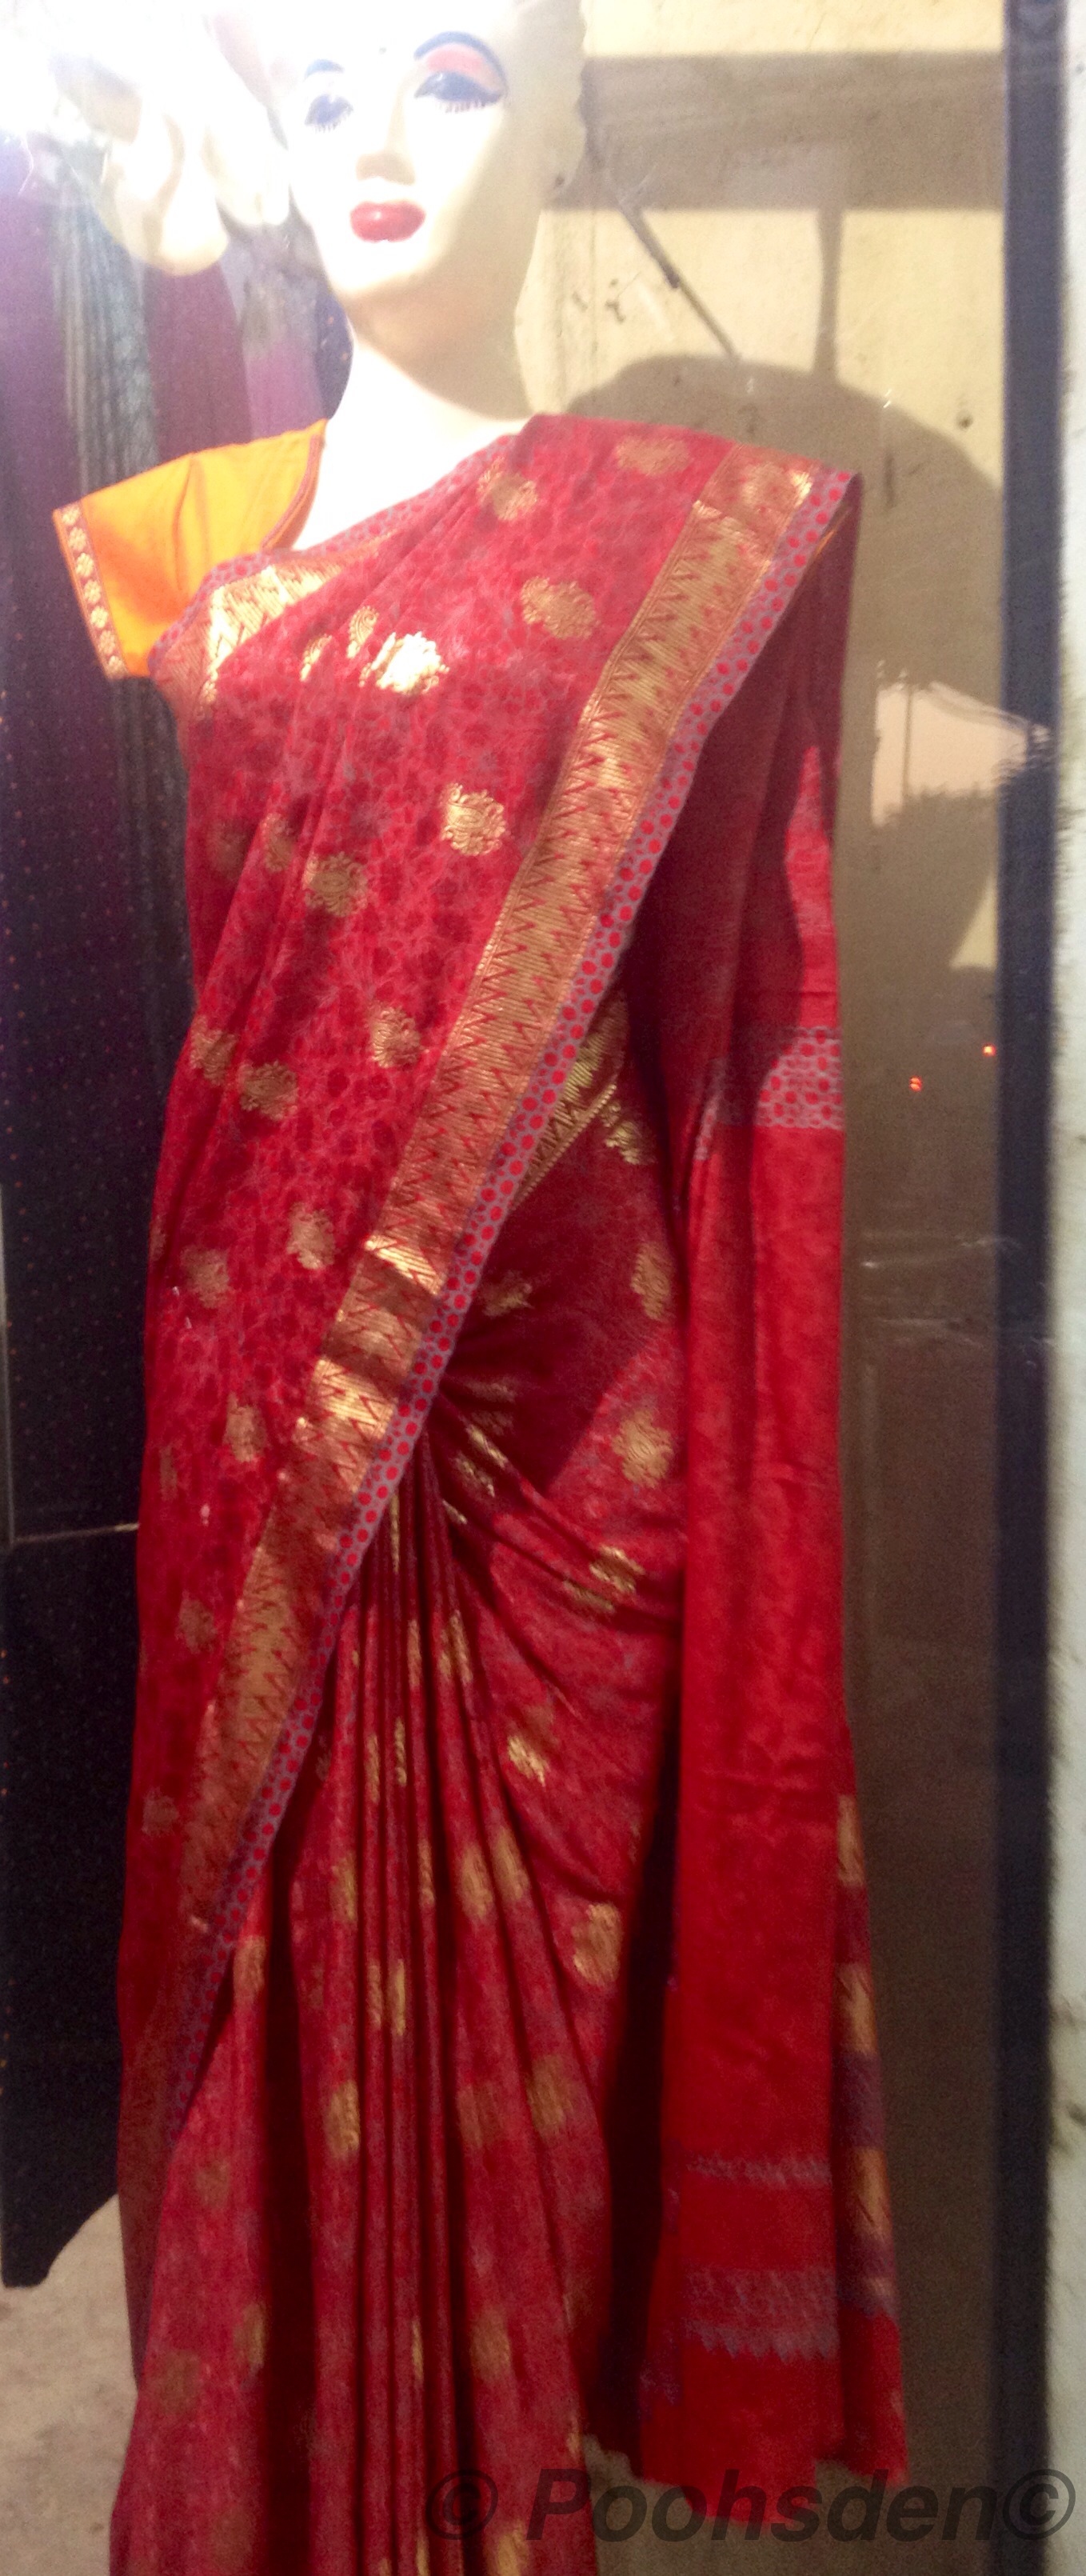 A mannequin at a clothing store in Chennai clad in a red saree